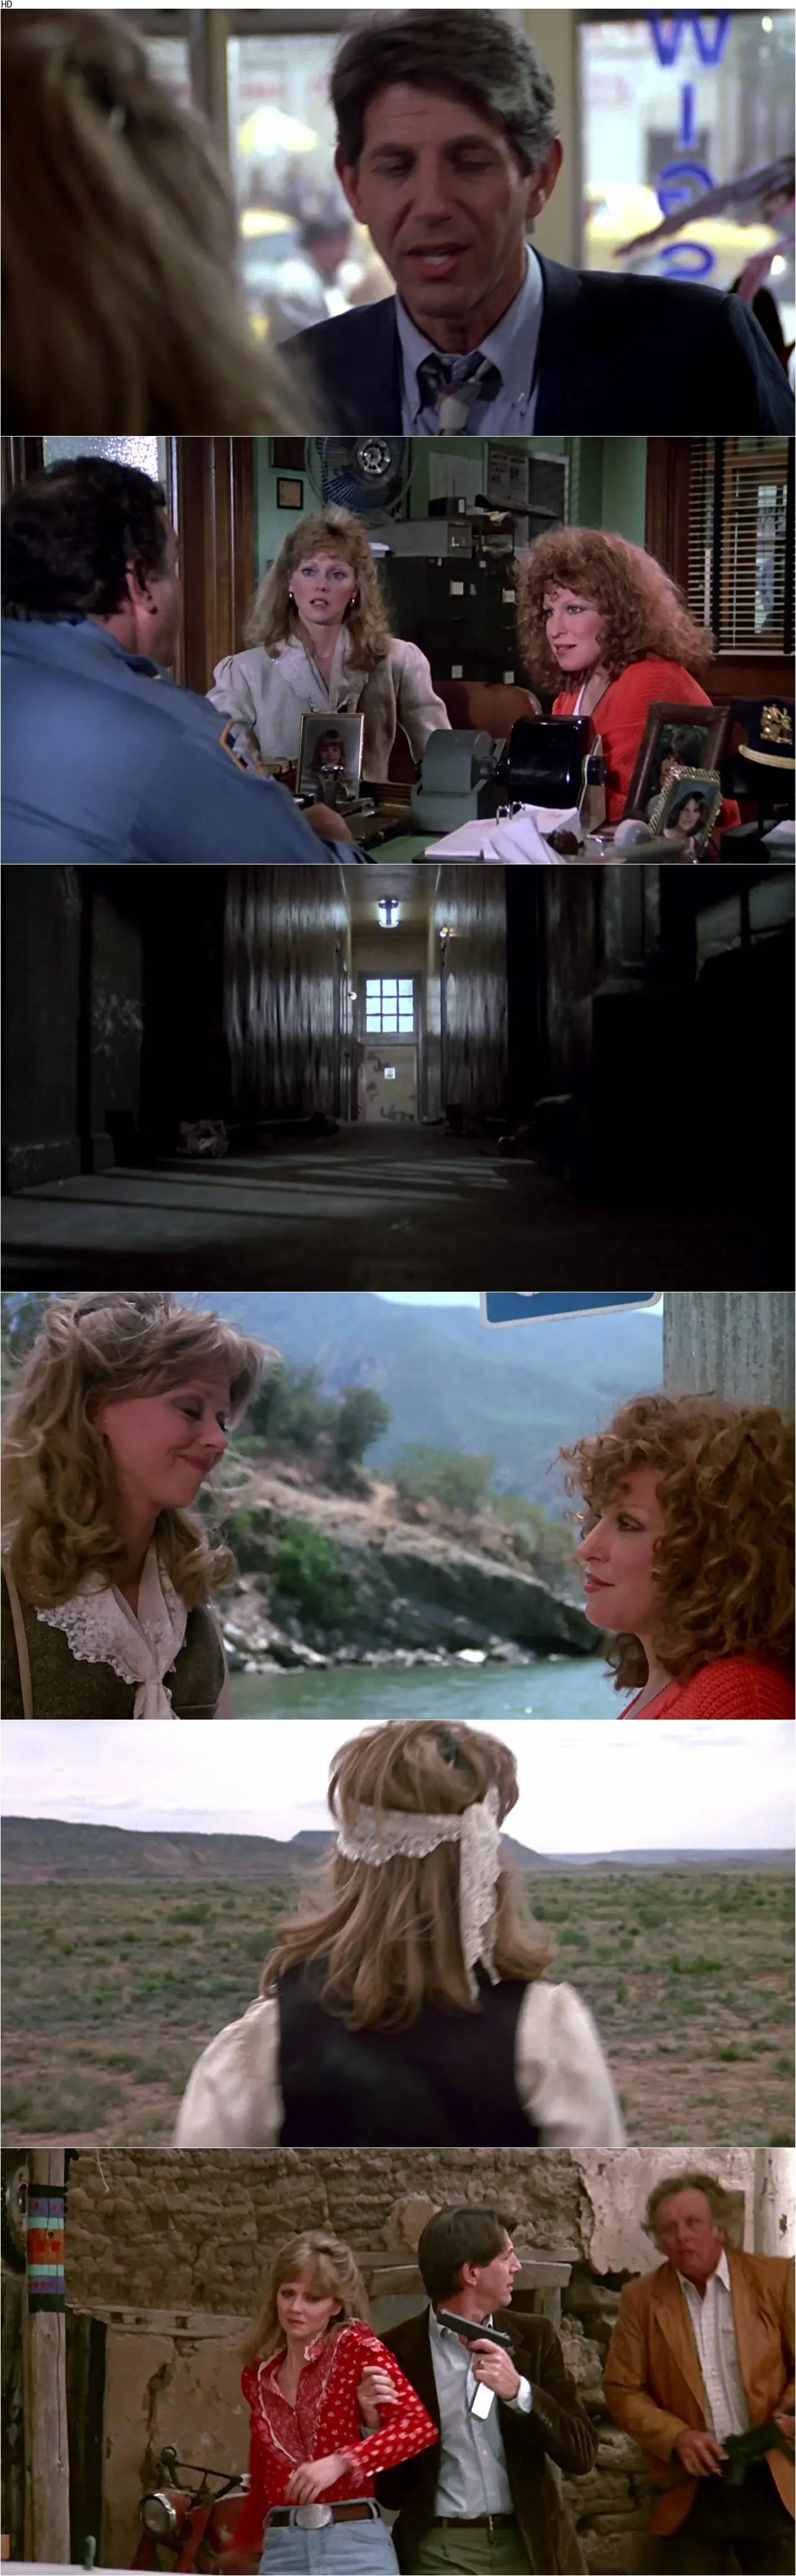 Outrageous Fortune (1987)